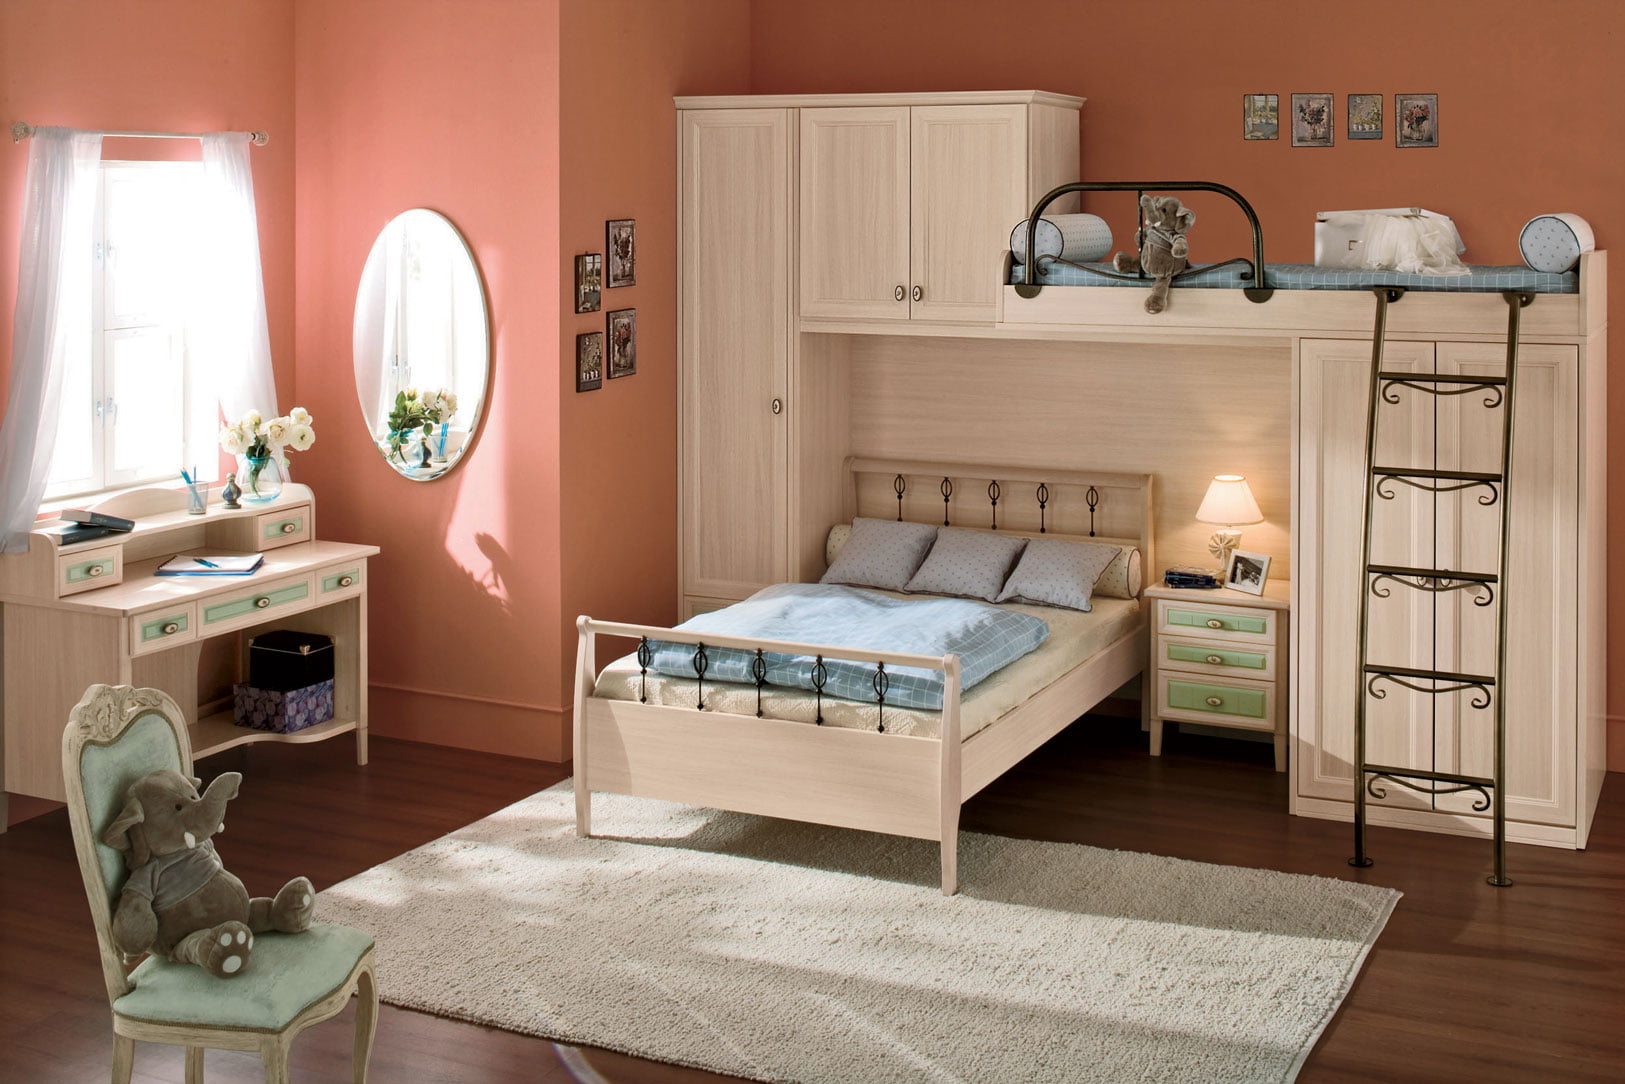 multifunctional bedroom ideas, Combination Of Brightness And Contrast,